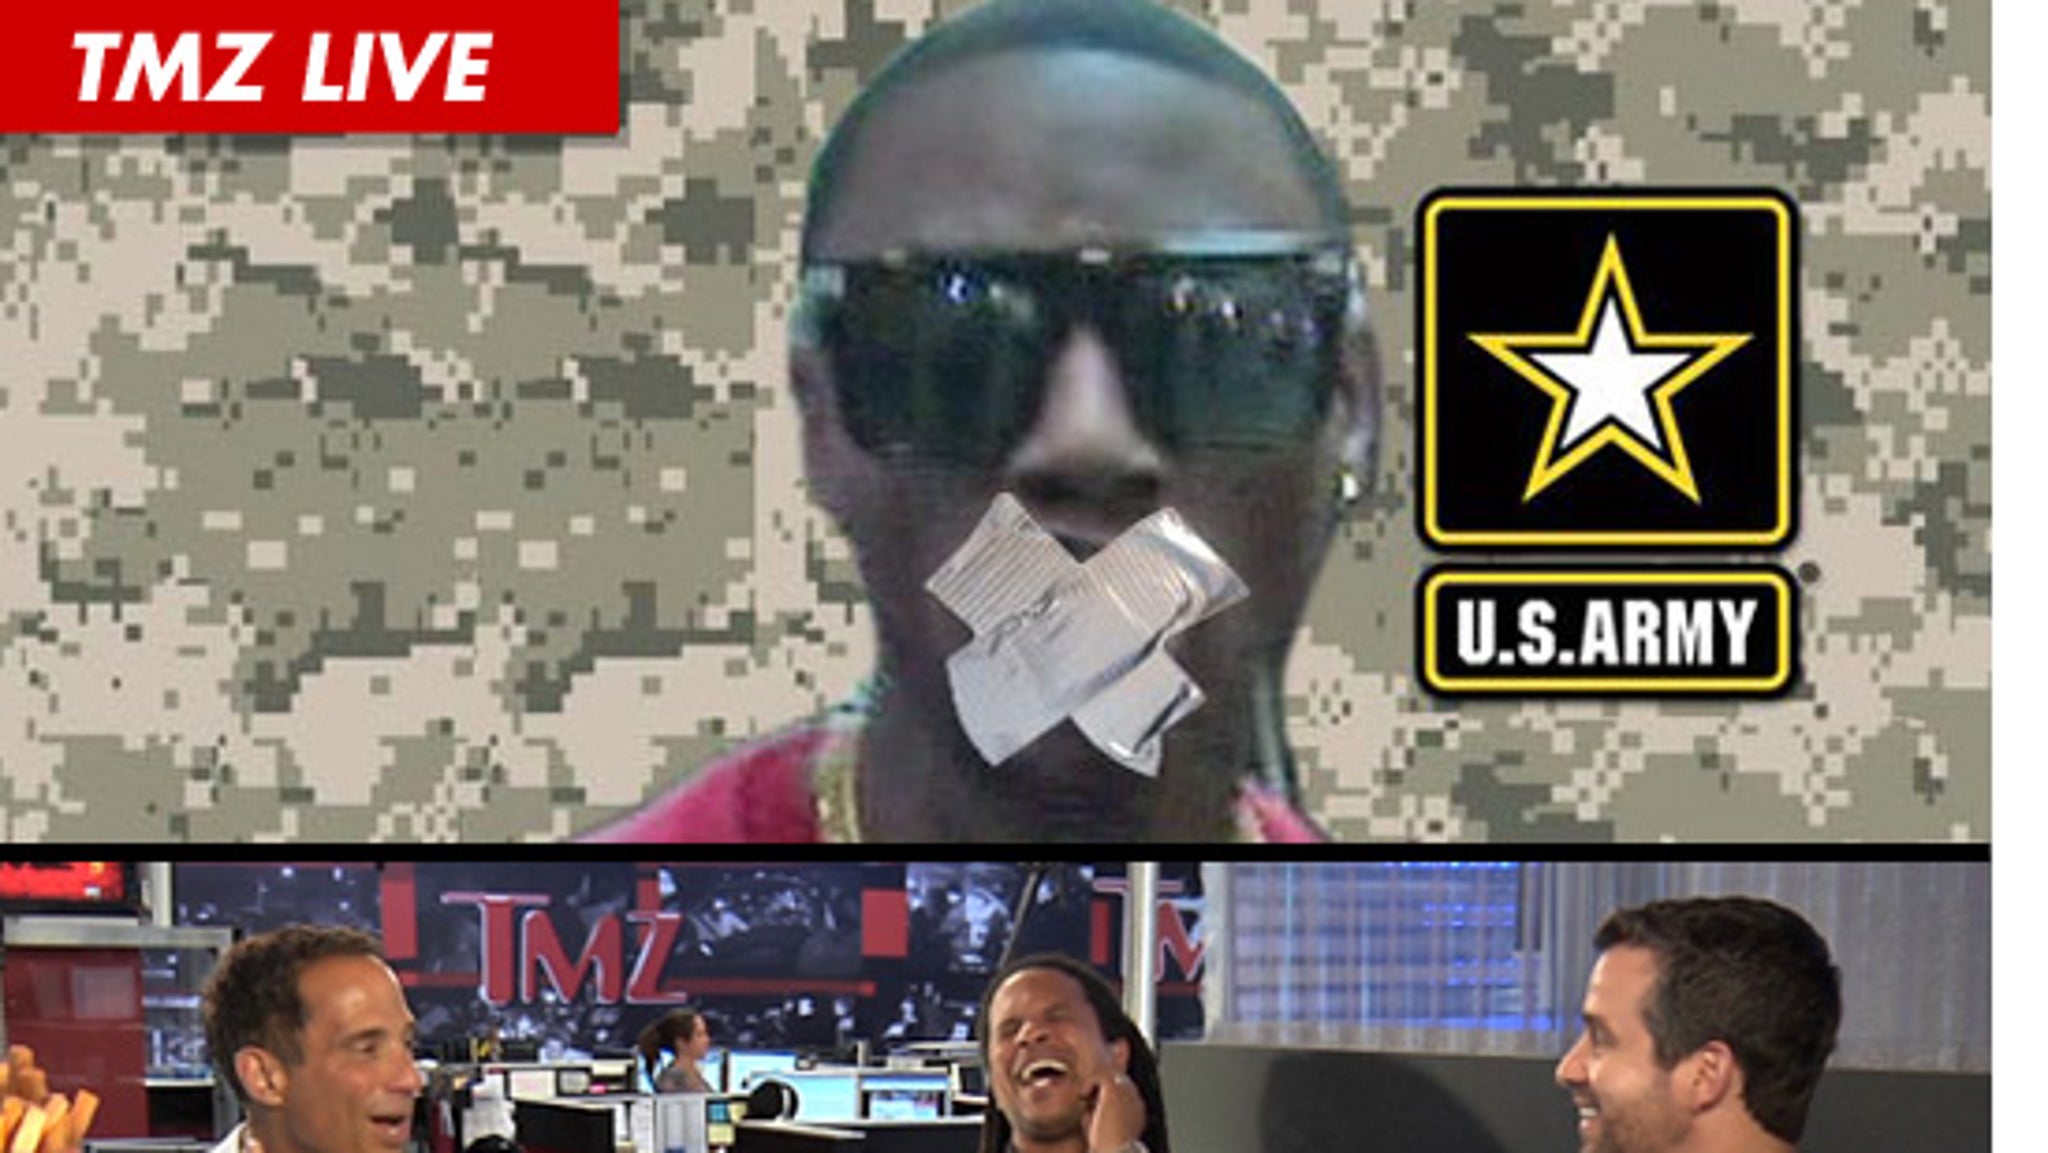 Download Pirates 2 Stagnet - TMZ Live 9/6/11: Does Soulja Boy Have the Right to Rip the Military?